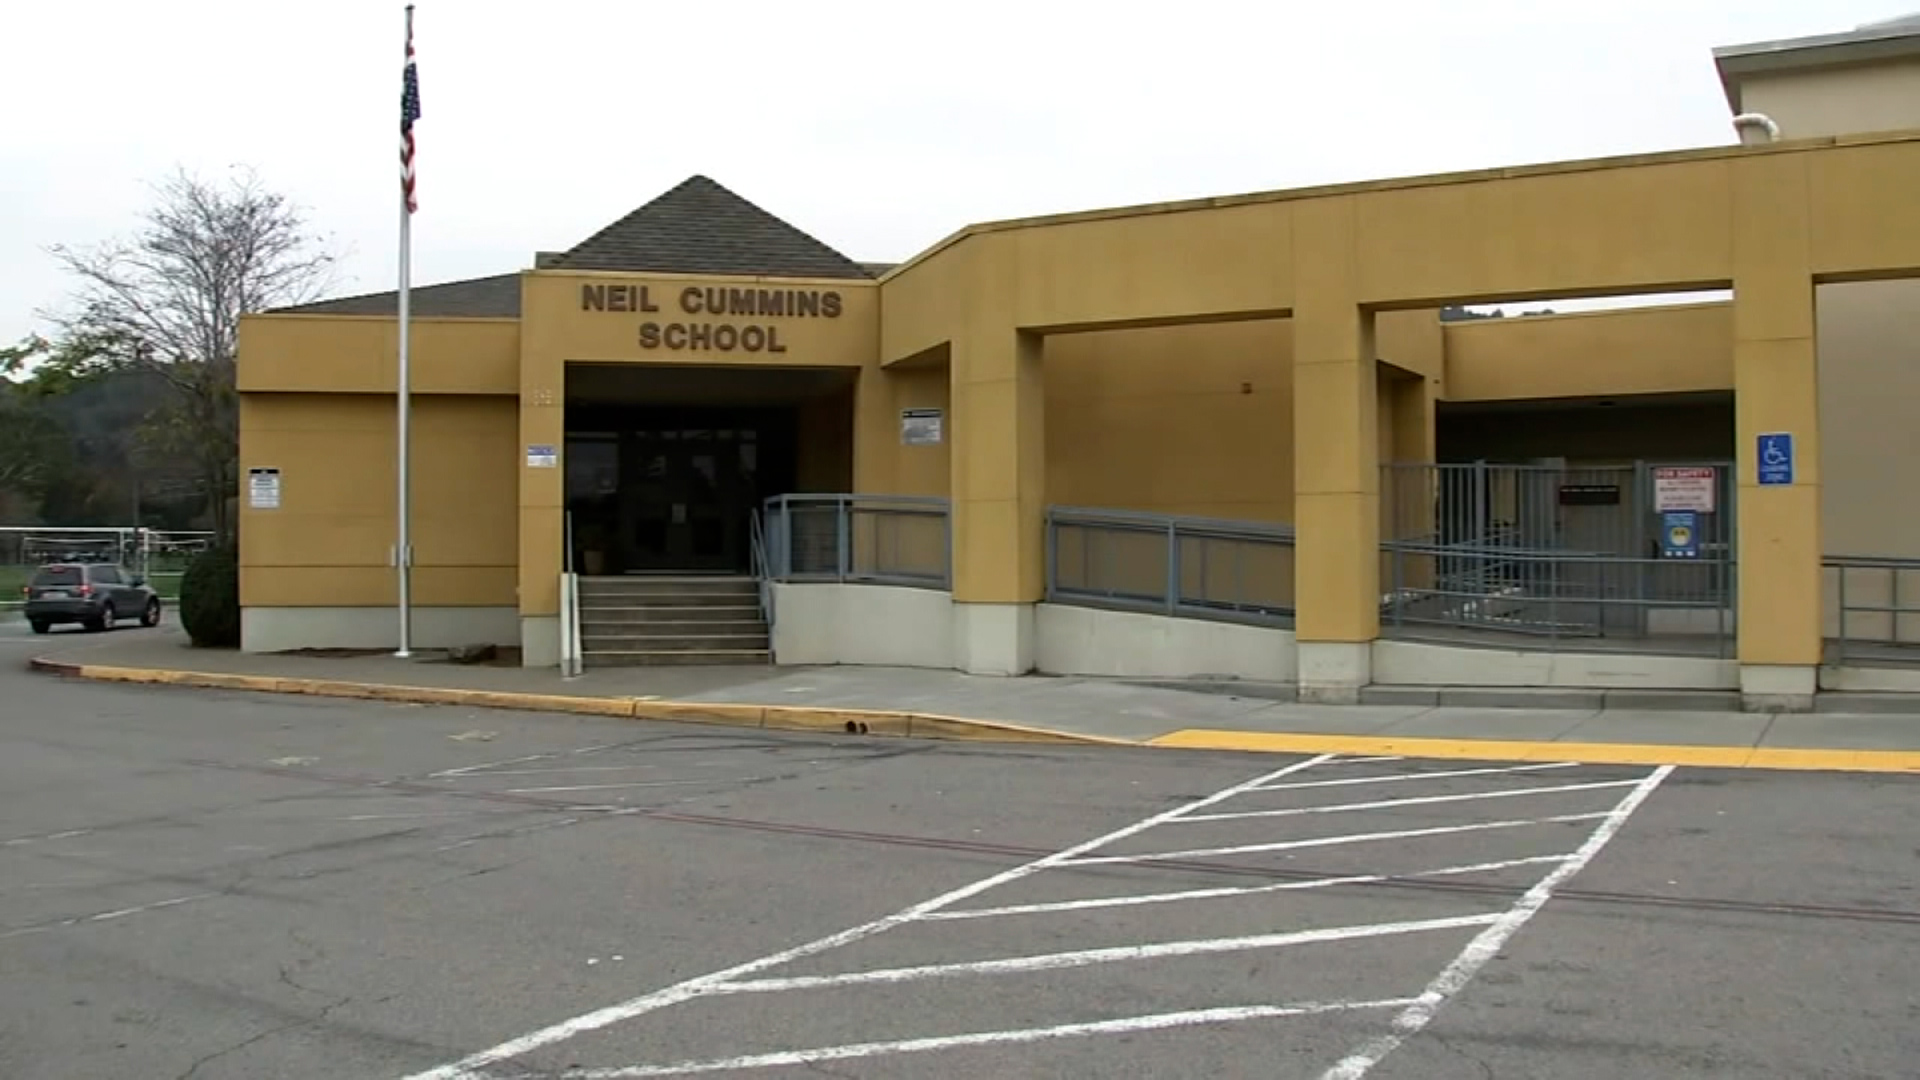 Neil Cummins Elementary School had to send 75 students to quarantine ahead of Thanksgiving holiday....